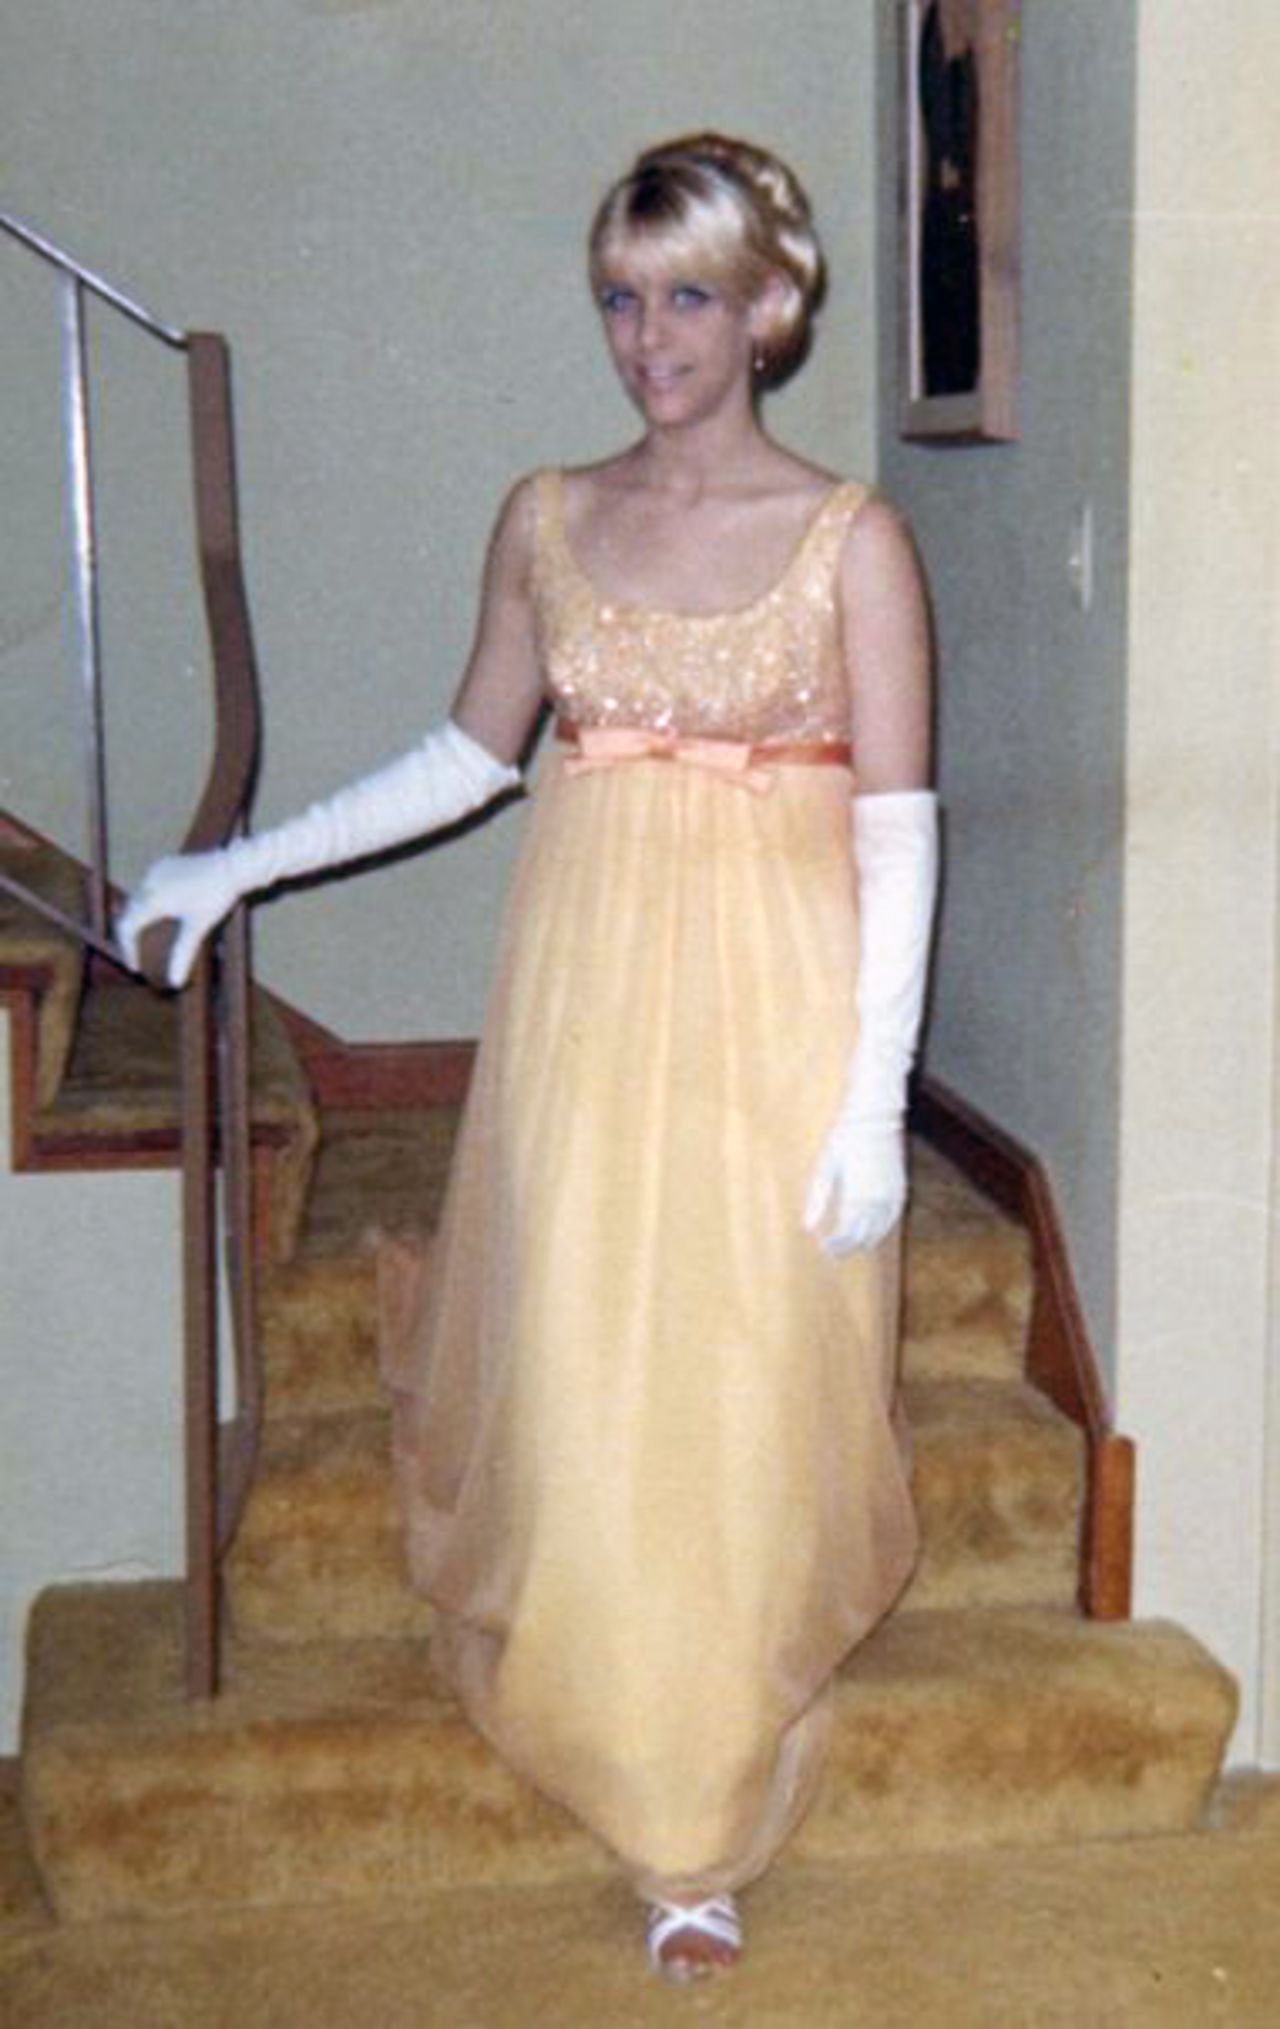 <a href="http://ireport.cnn.com/docs/DOC-947808">Nikki C. Morris</a> wore a yellow dress and white gloves for her prom in 1967, but she says '60s fashion was too colorful for her taste. "I remember thinking that most of the dresses and the girls wearing them looked like Easter eggs," Morris says. "I wasn't a fan." 